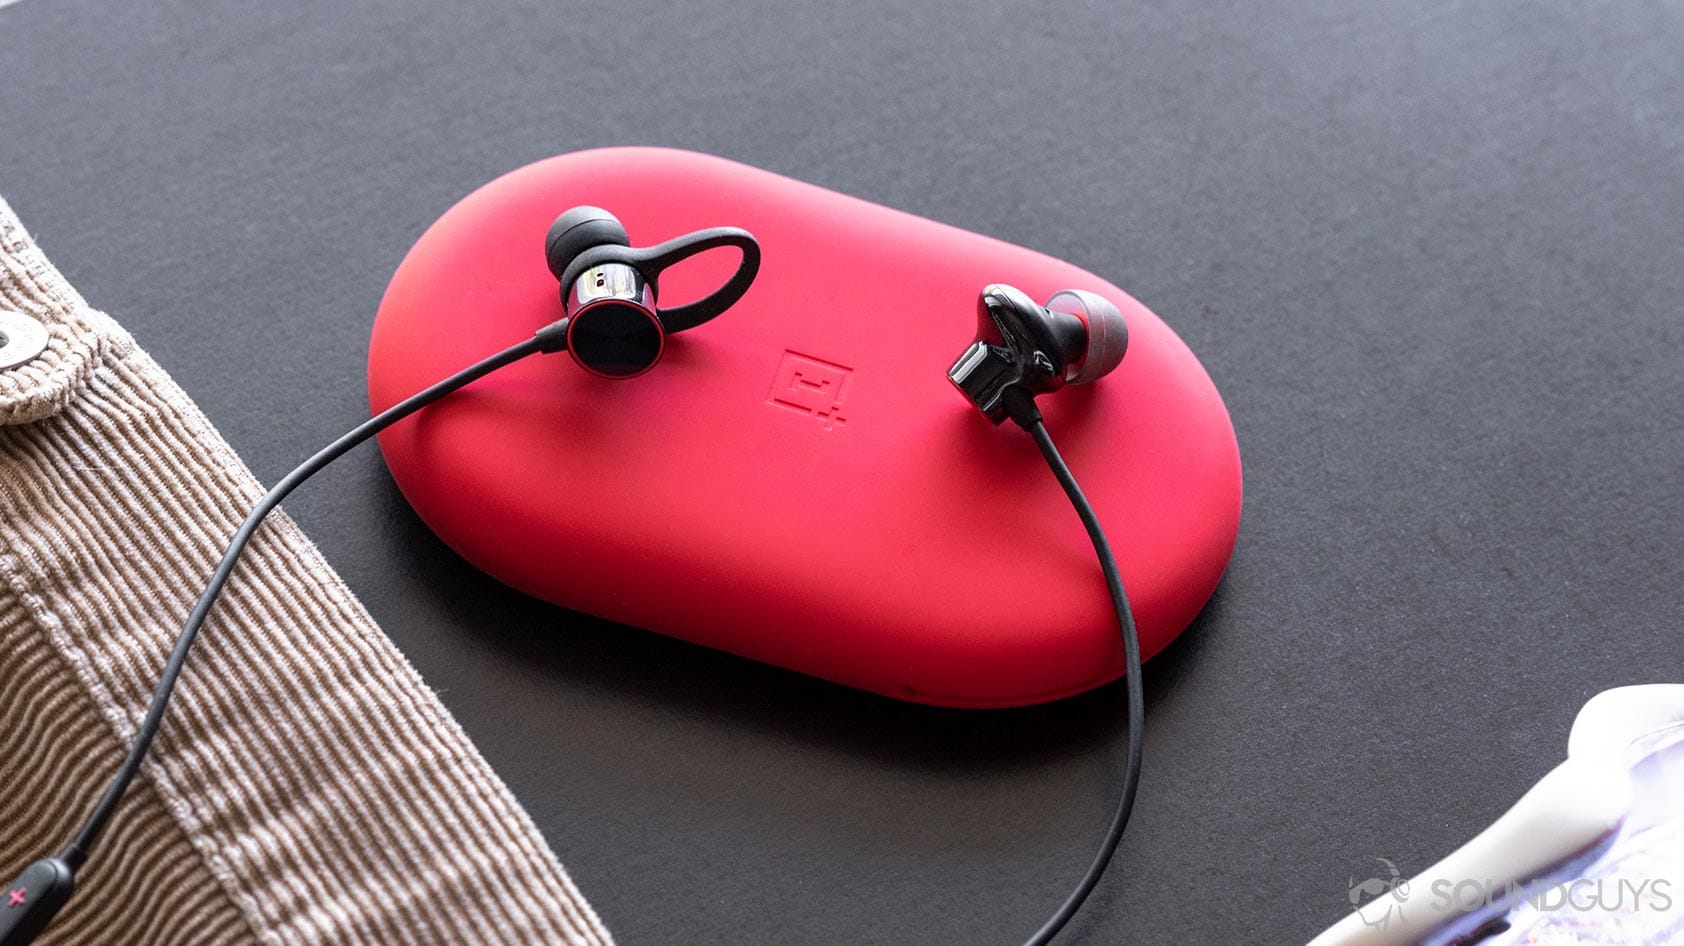 OnePlus Bullets Wireless 2: The old Bullets Wireless on the left and new on the right. They're sitting on the red carrying pouch.